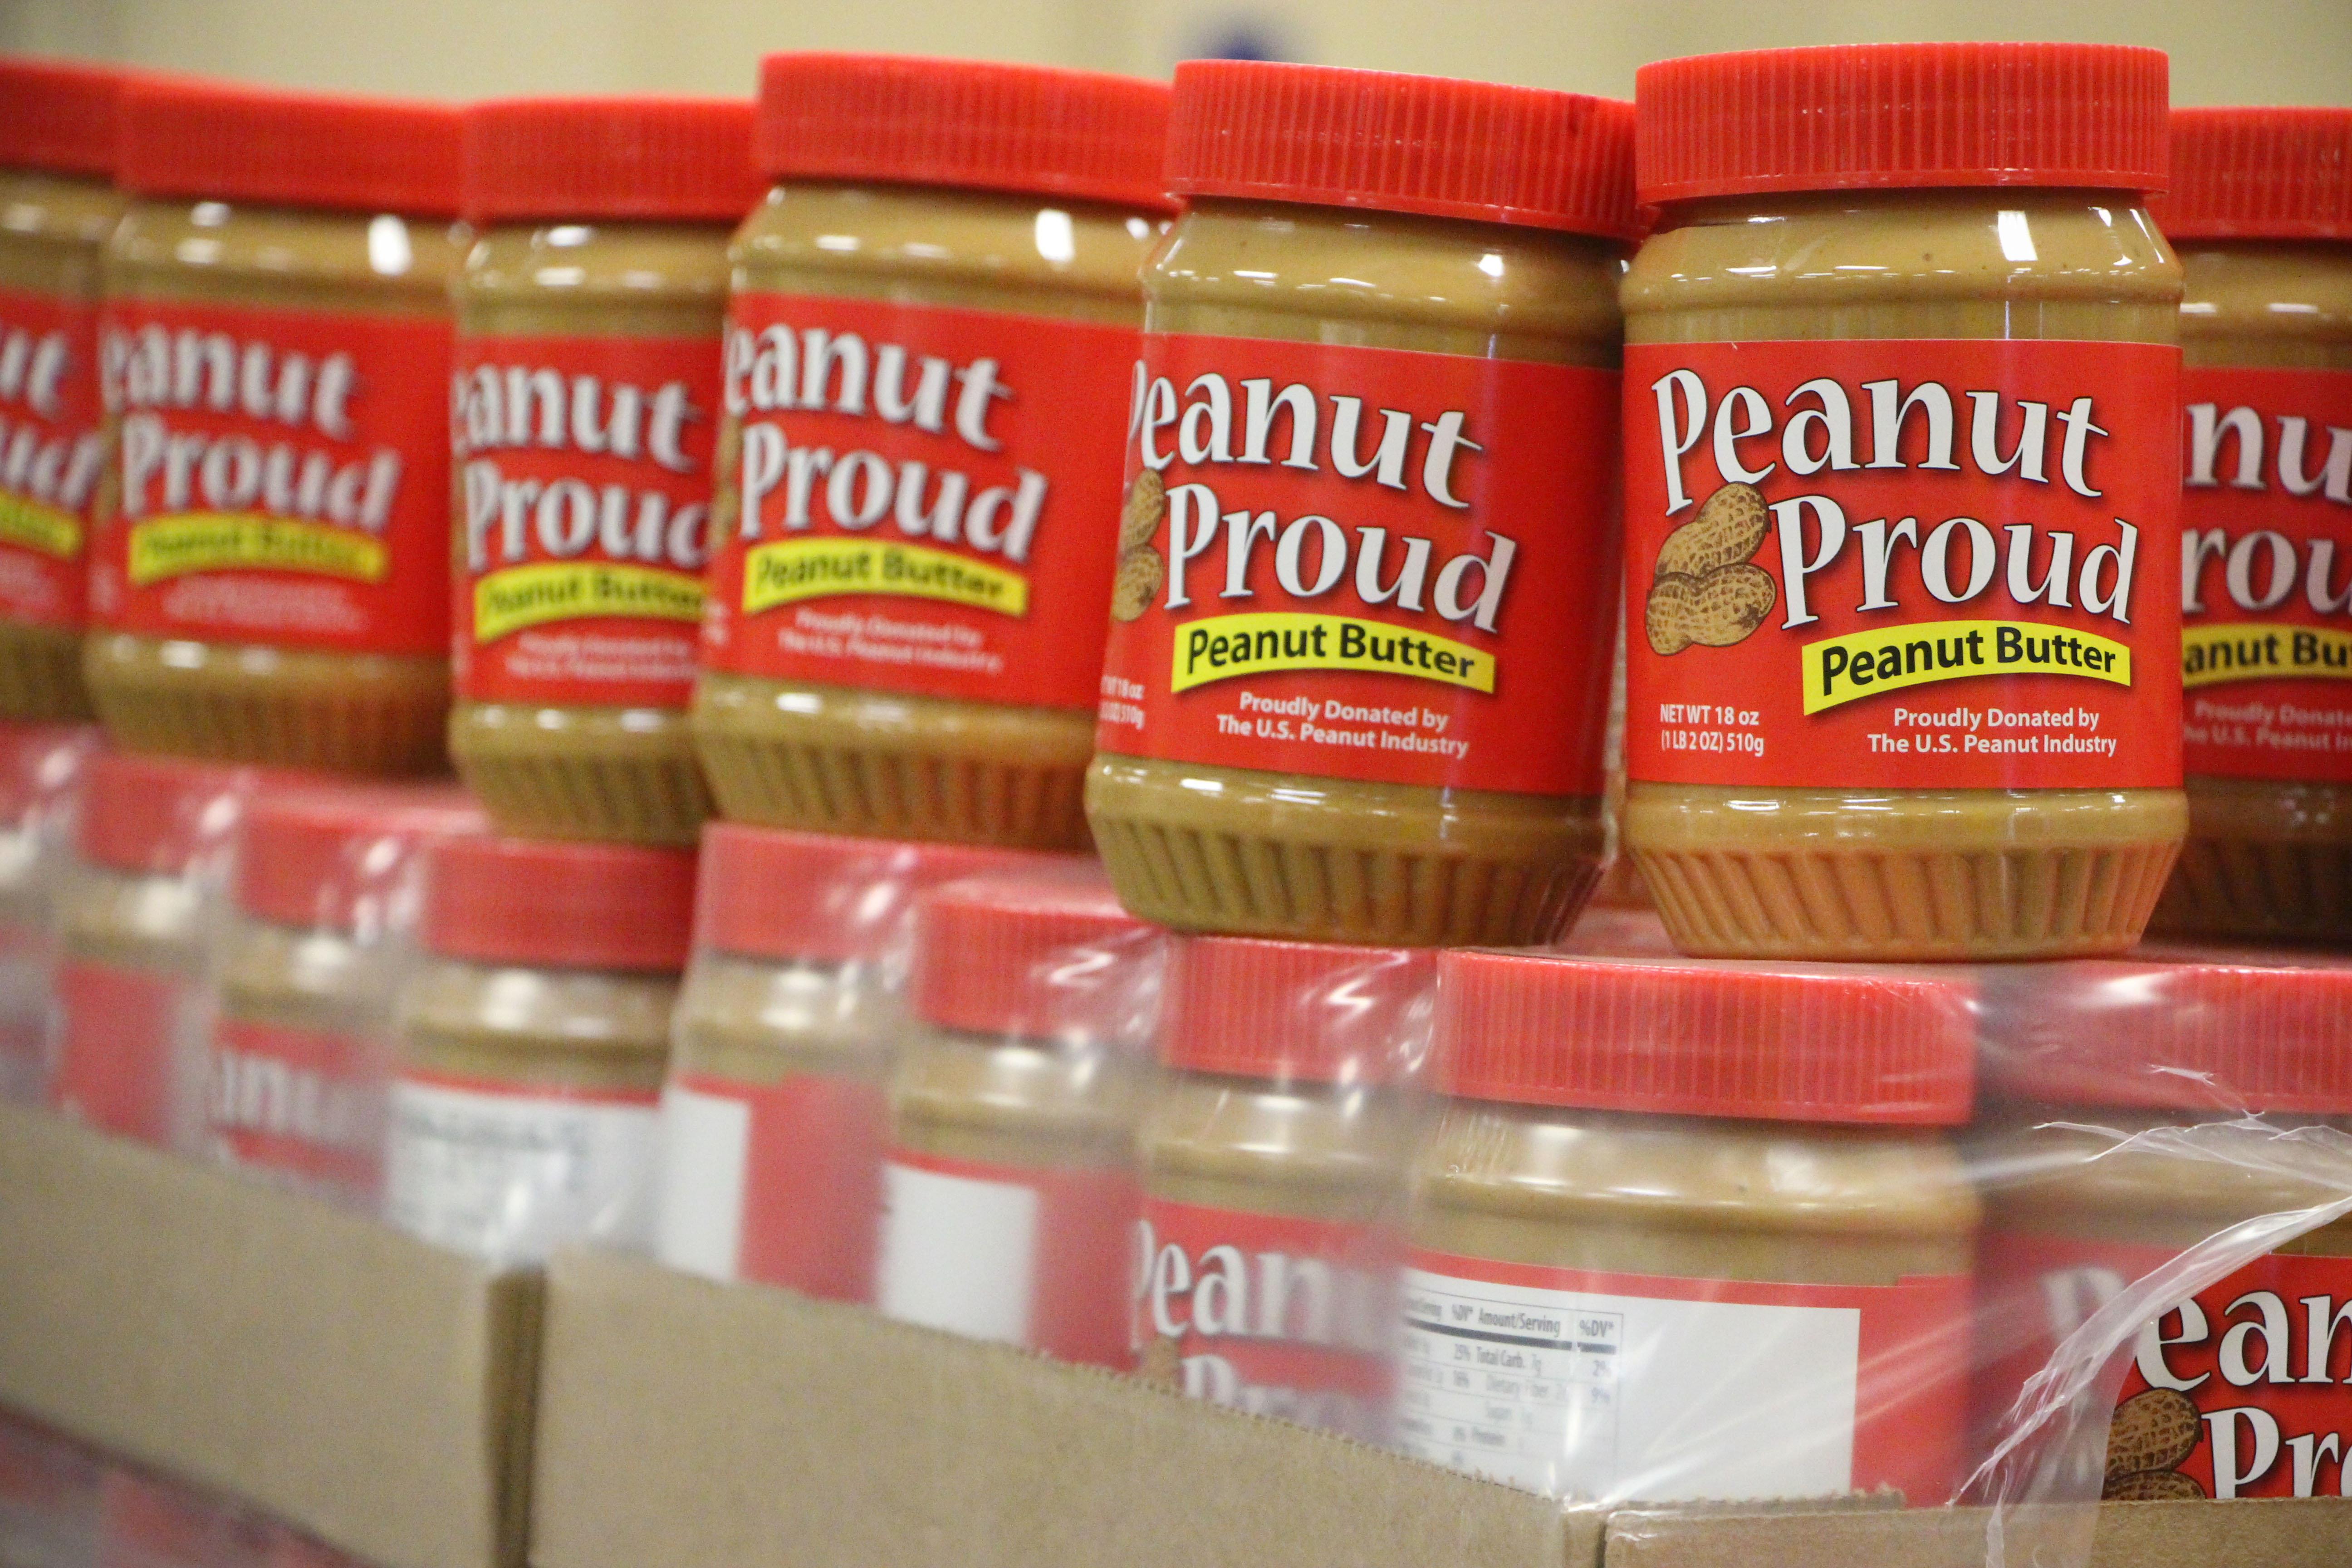 Peanut Proud peanut butter is donated for disaster relief to provide nutritious, sustaining meals to those who suddenly find themselves suffering from food insecurity.